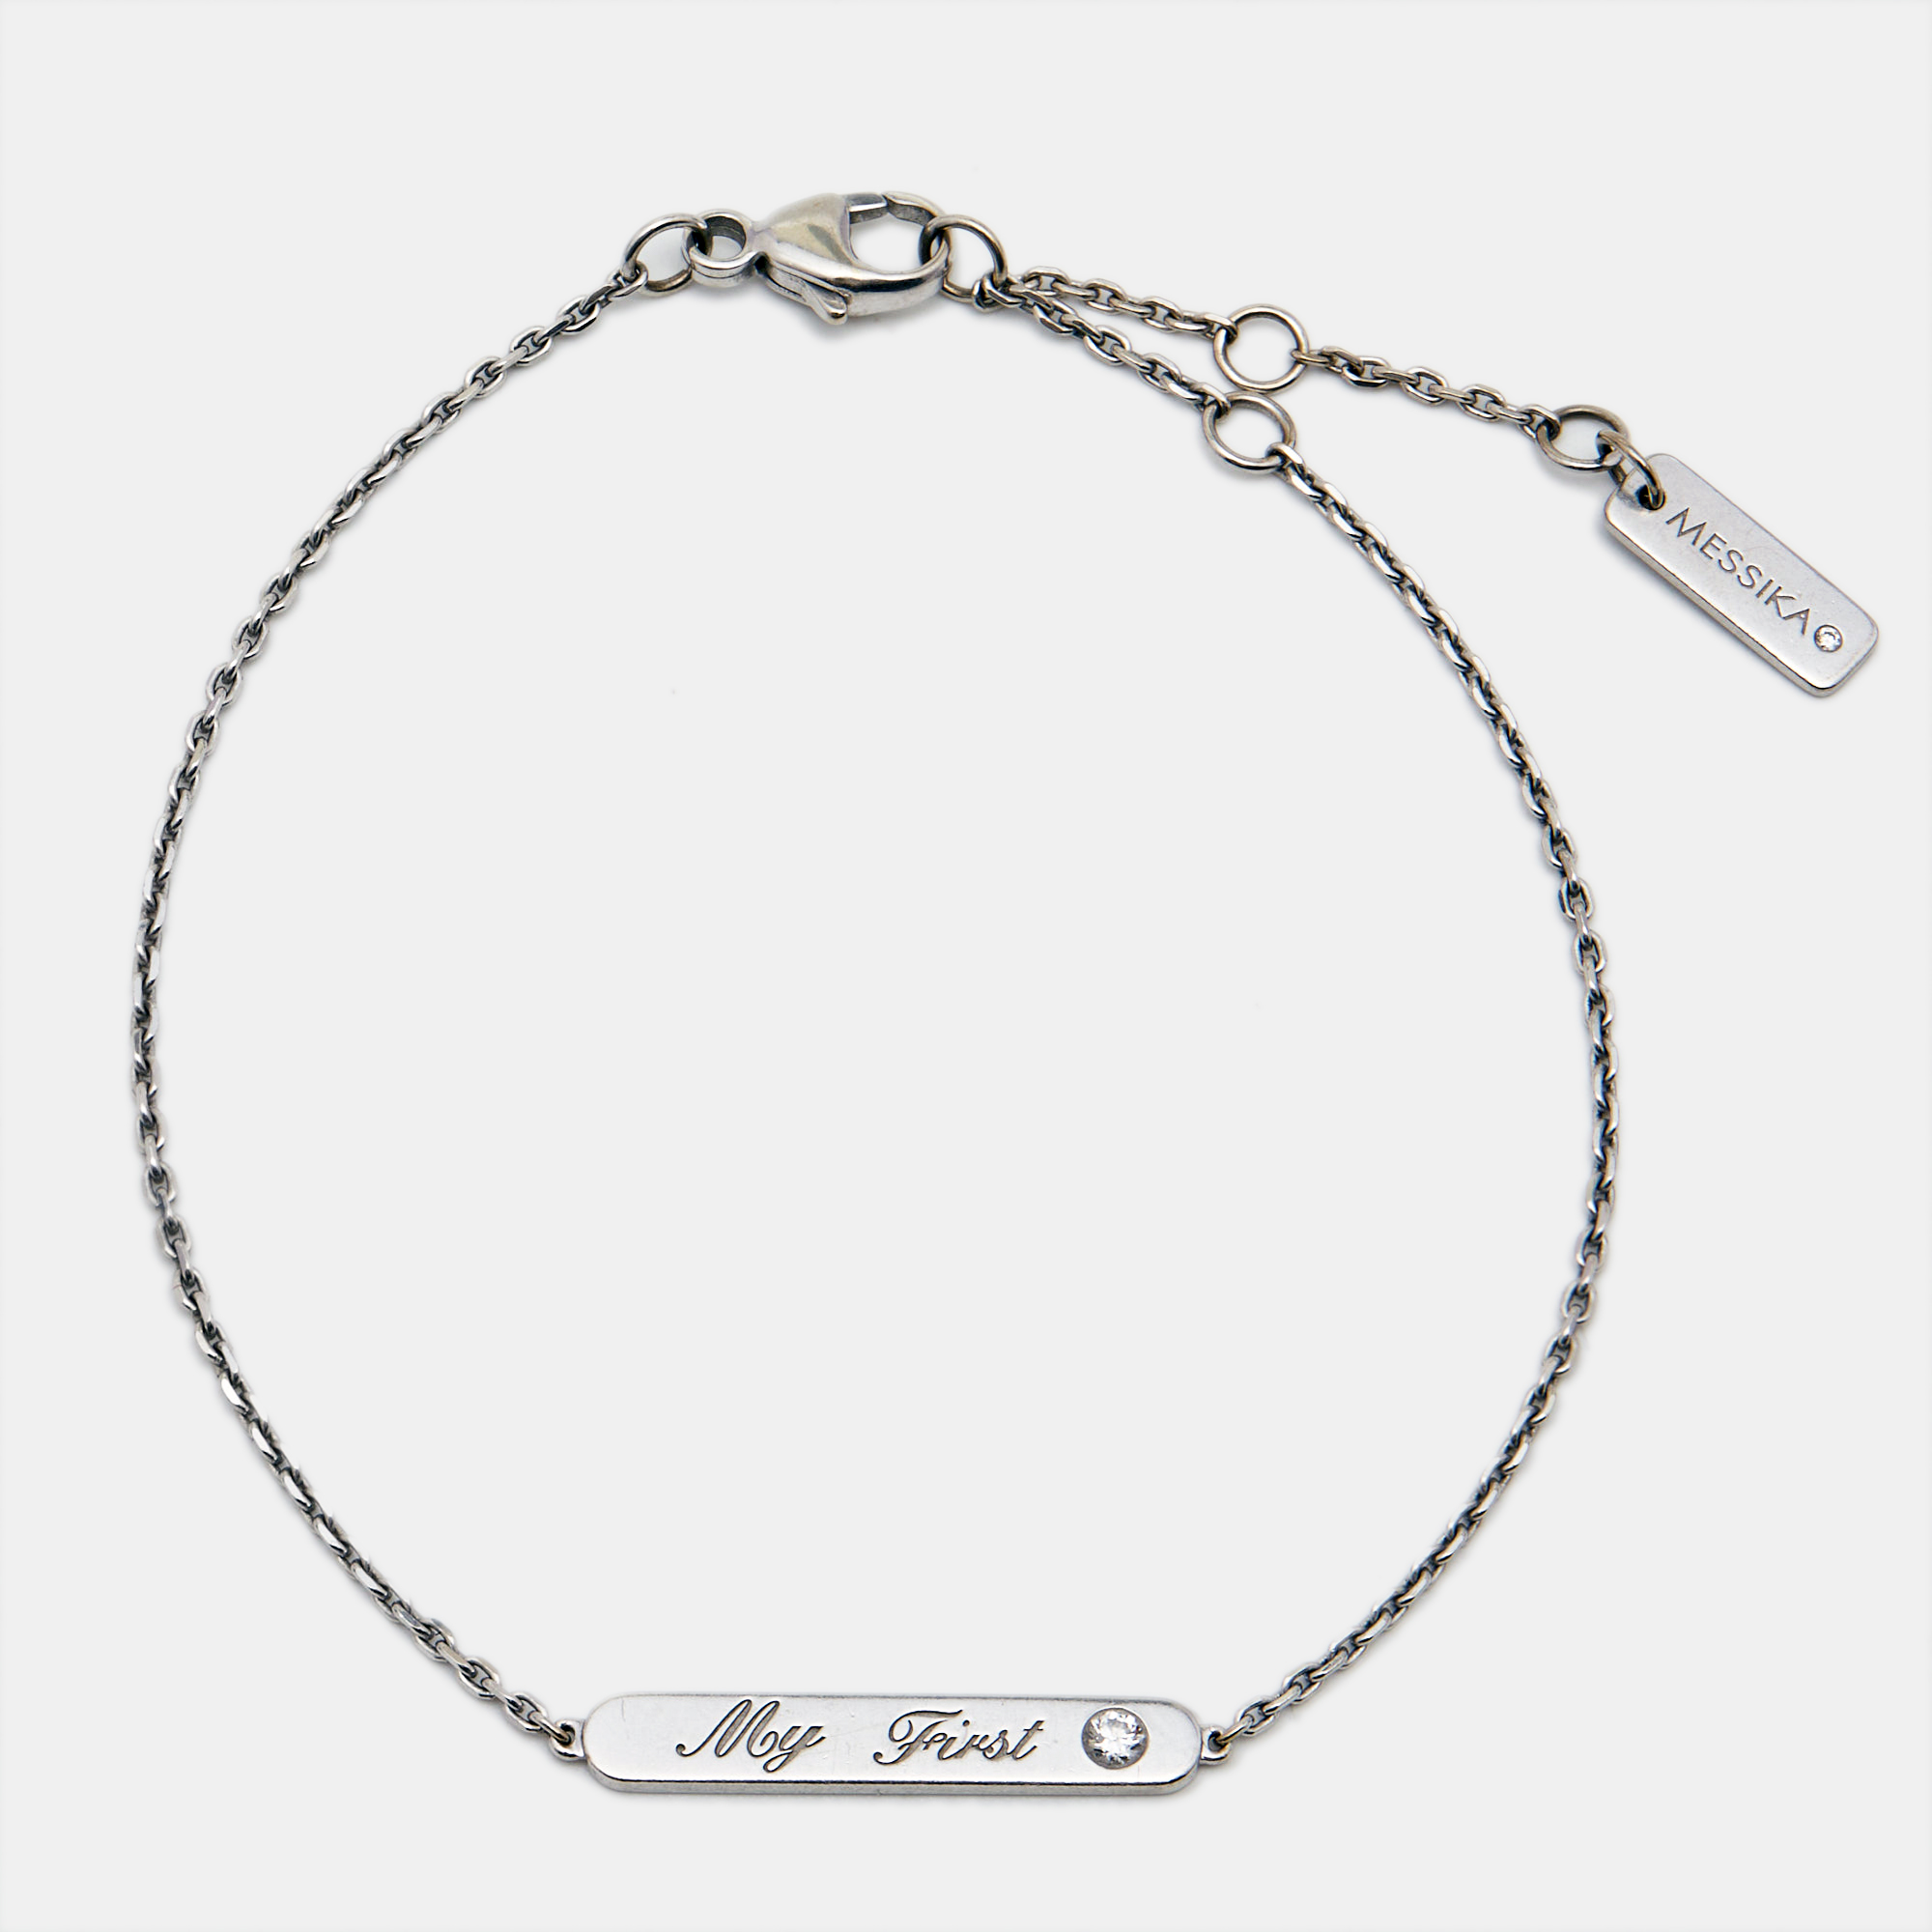 The Messika My First bracelet is an exquisite piece of jewelry crafted from premium 18k white gold. It features a delicate design adorned with a brilliant cut diamond adding elegance and sophistication to any wrist.